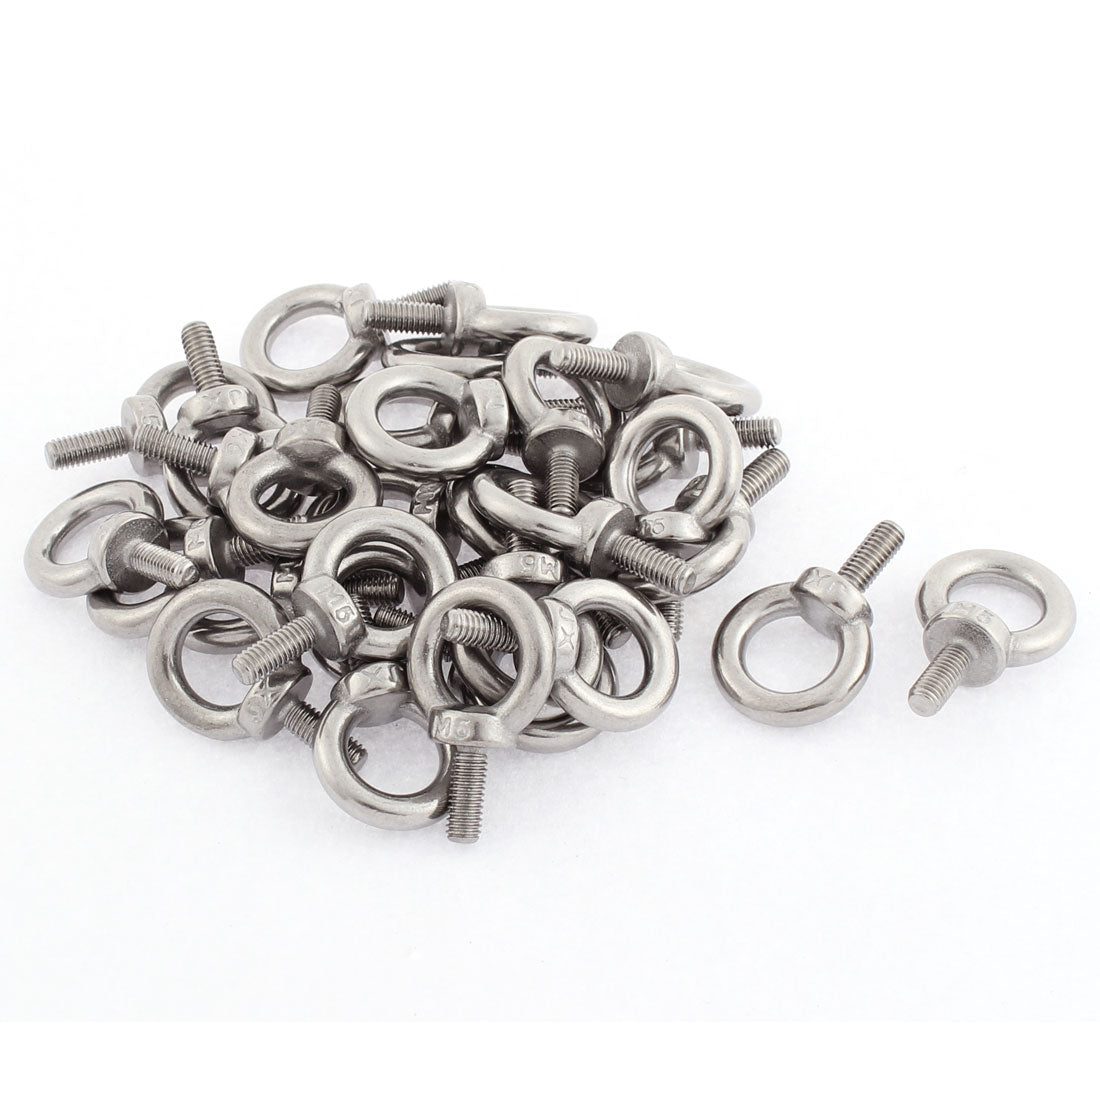 uxcell Uxcell M5 x 12mm Male Thread Metal Machinery Shoulder Lifting Eye Bolt 30pcs